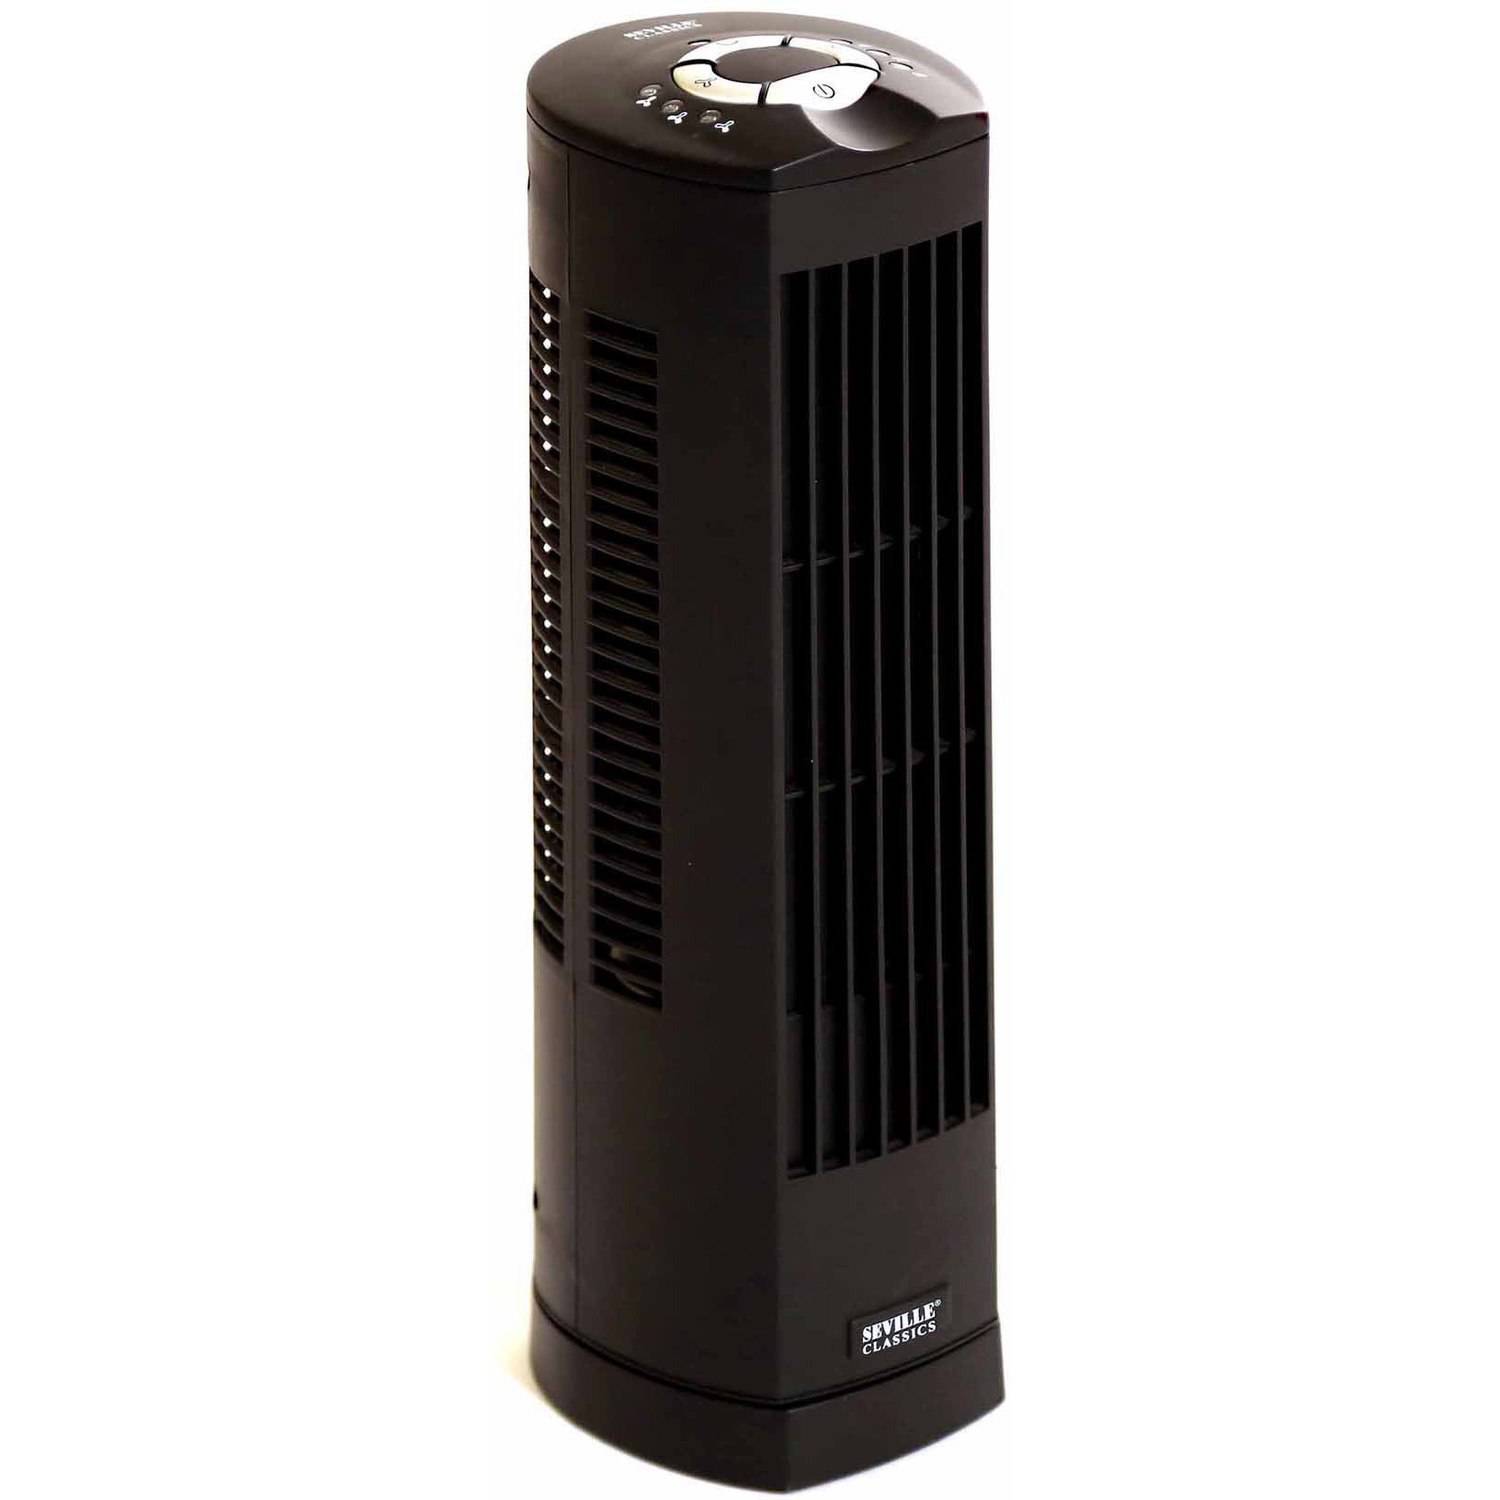 17" Personal Rotating Tower Fan, Black by Seville Classics - image 4 of 7